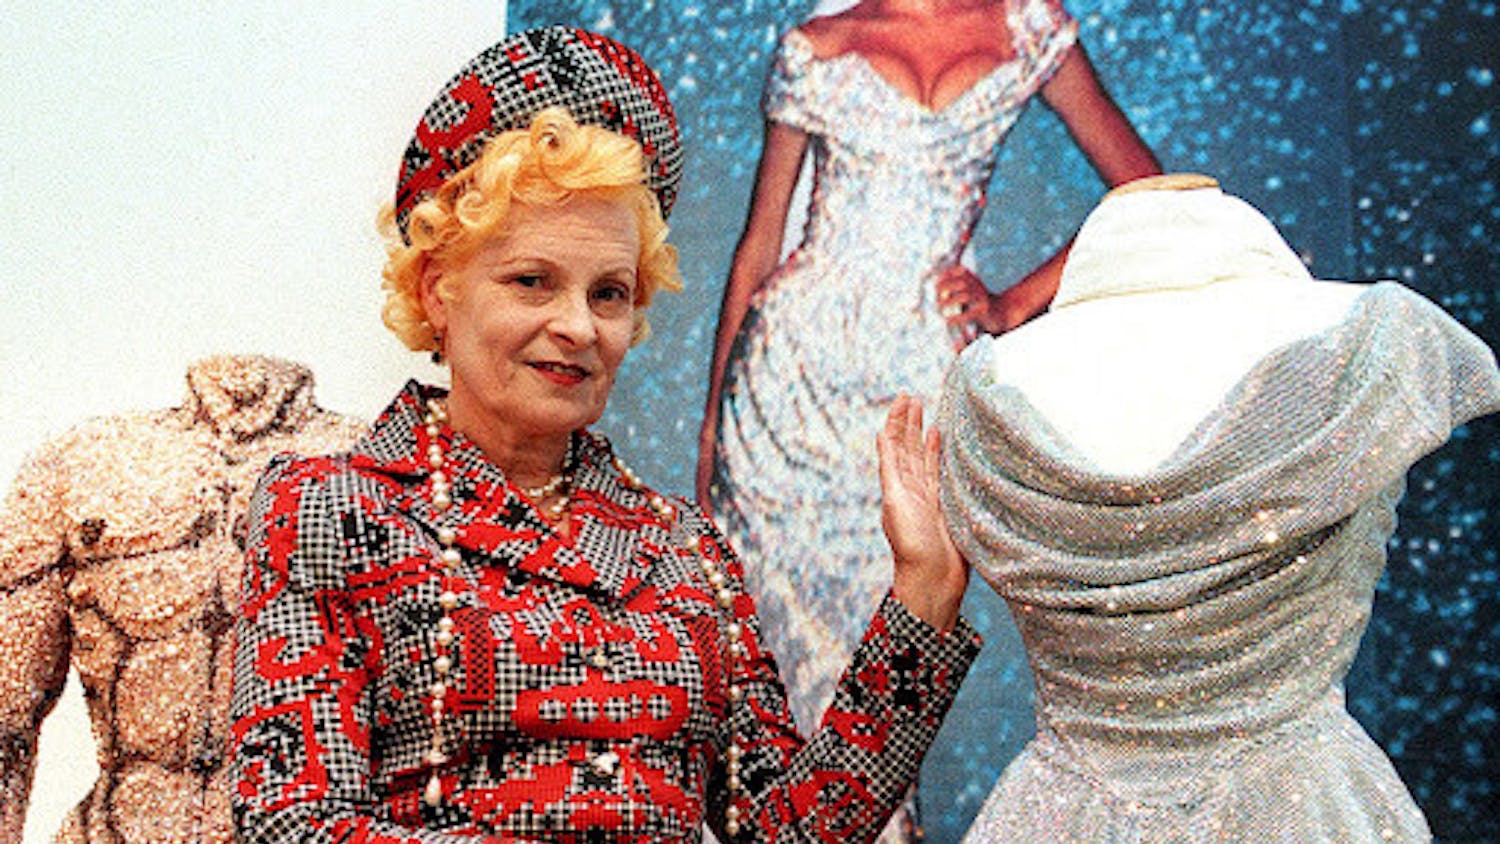 Vivienne Westwood poses with one of her dresses inspired by 18th century France in Vienna | Source: NBC News